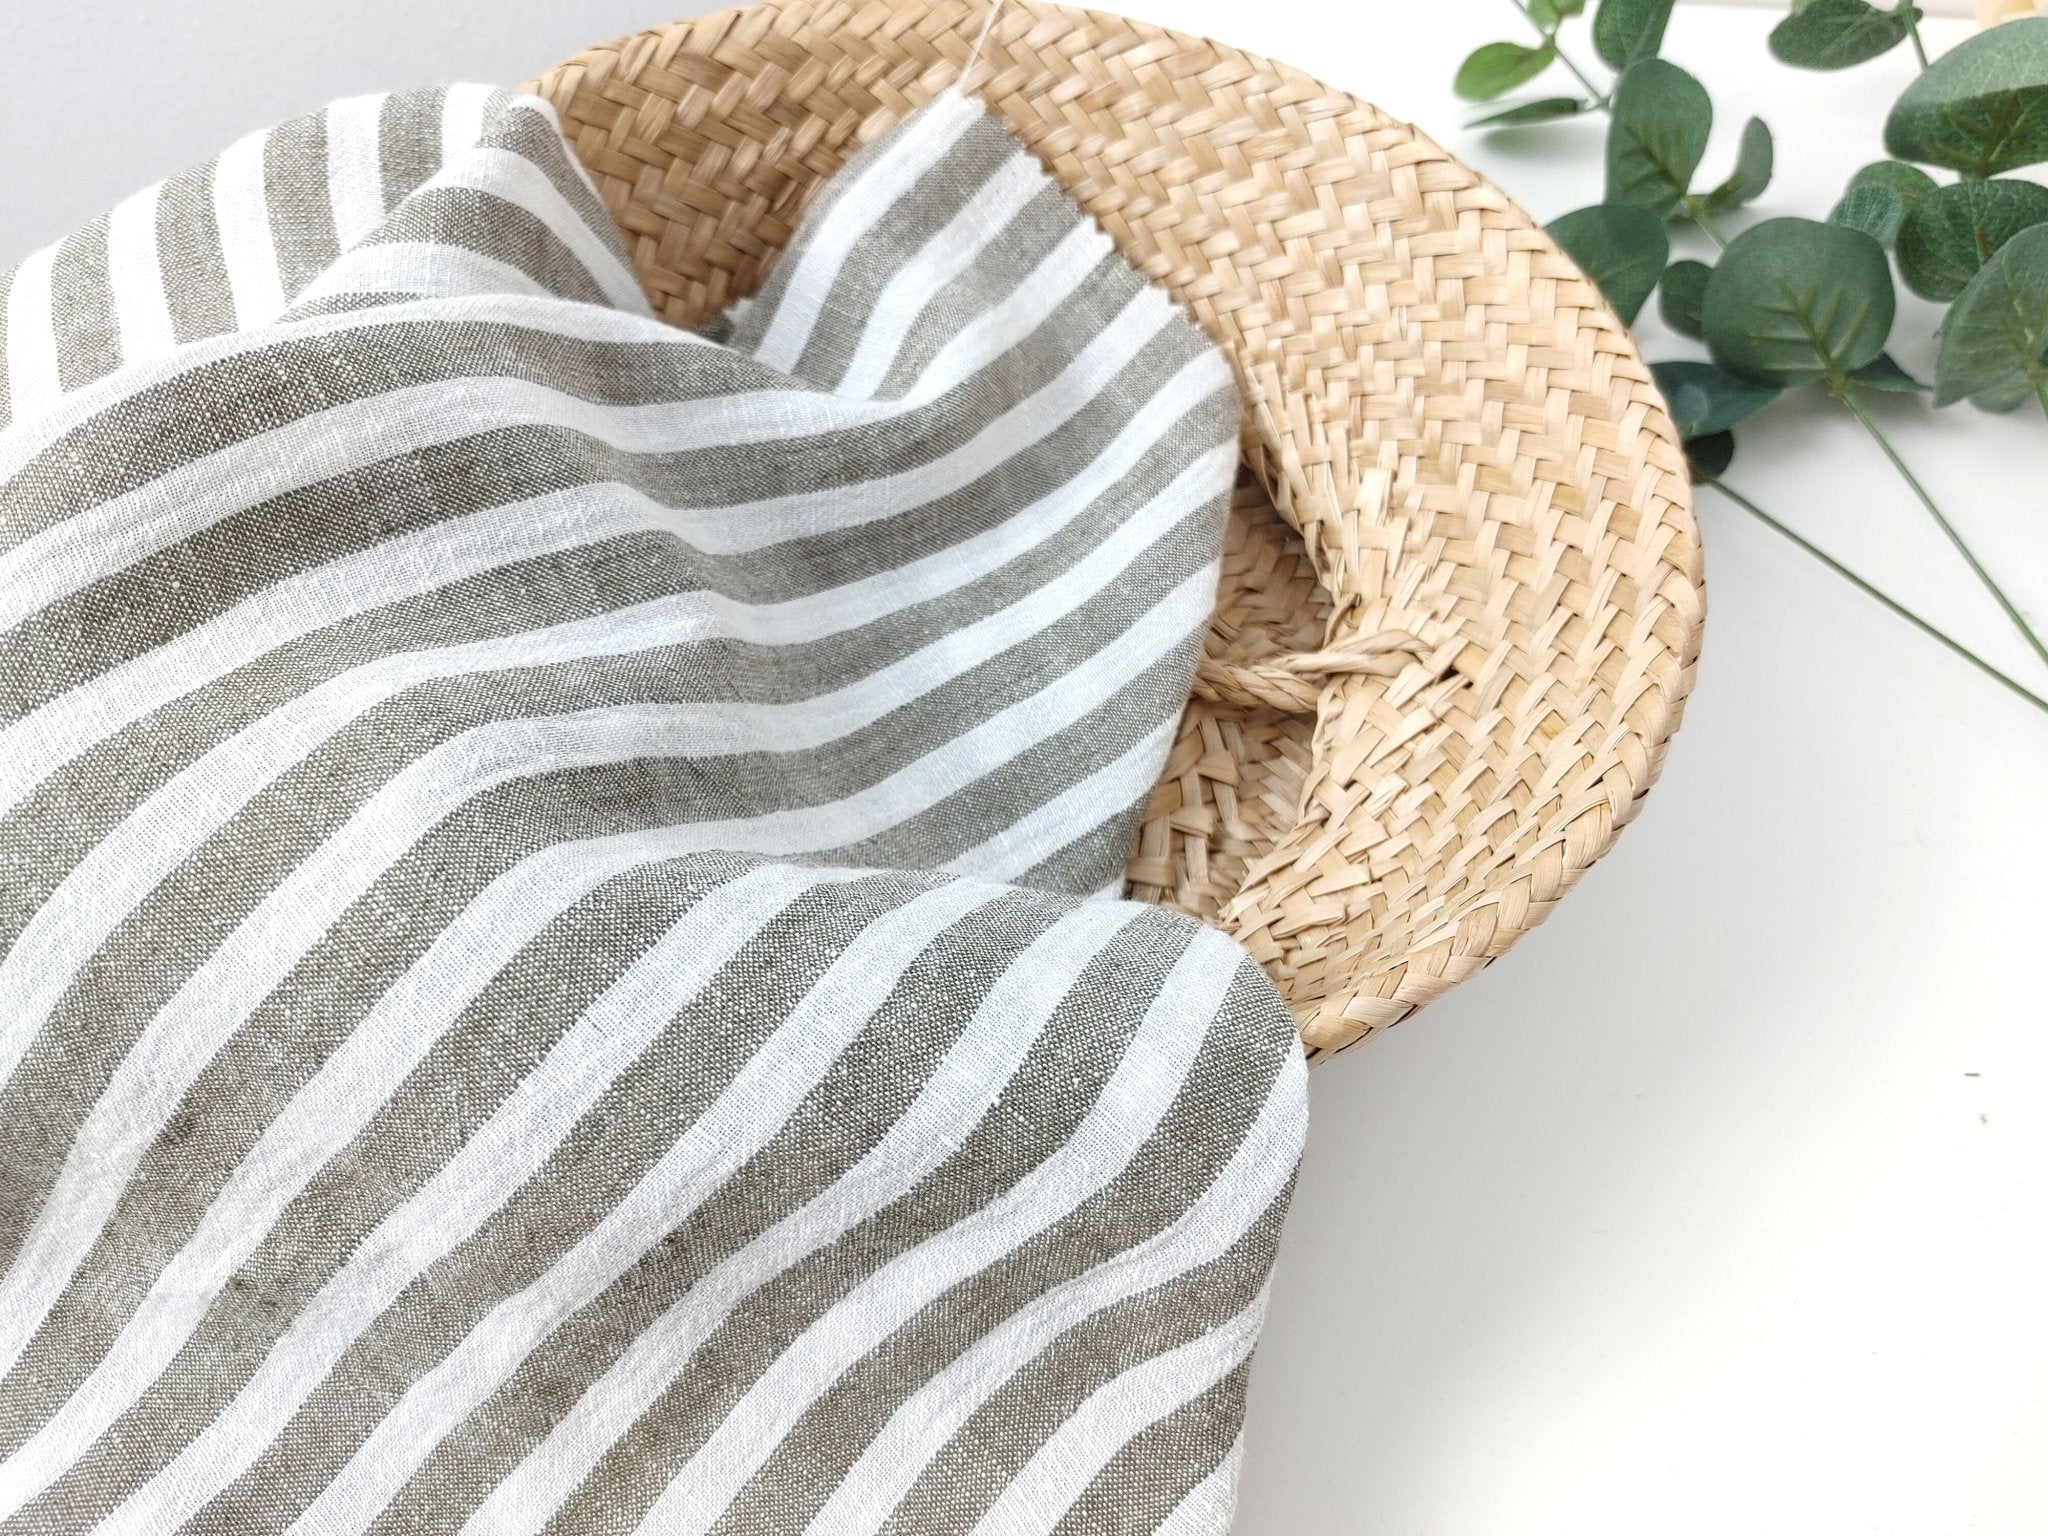 Effortless Stripes: Linen Rayon Blend Fabric with Subtle Wrinkle Charm 6518 - The Linen Lab - Khaki